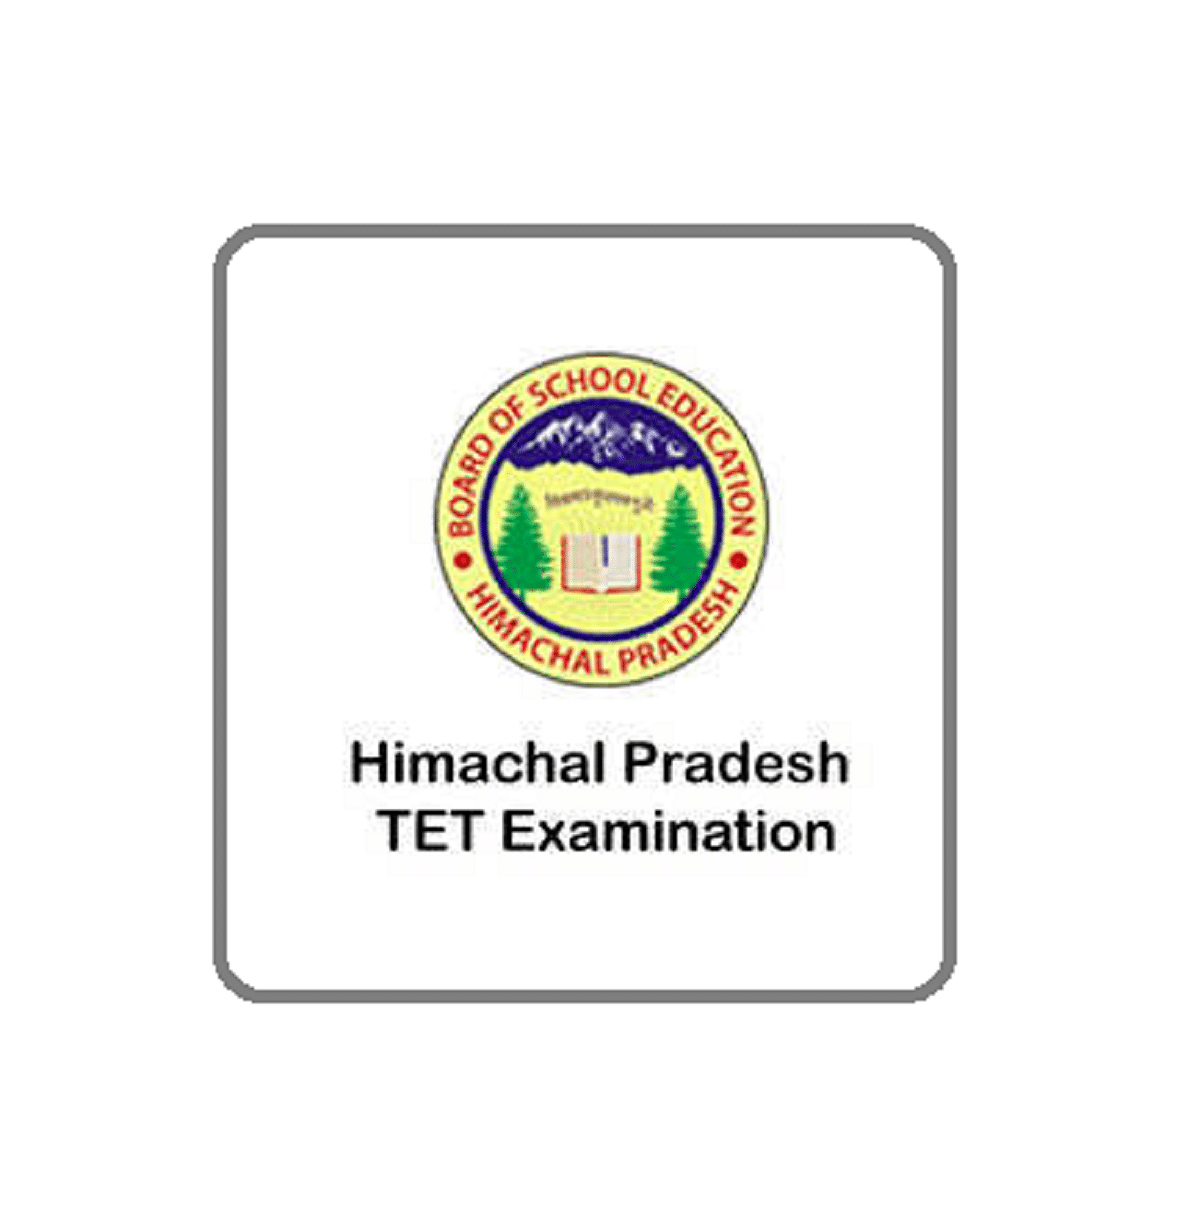 HP TET Provisional Answer Key 2021 Released, Know How to Check Here